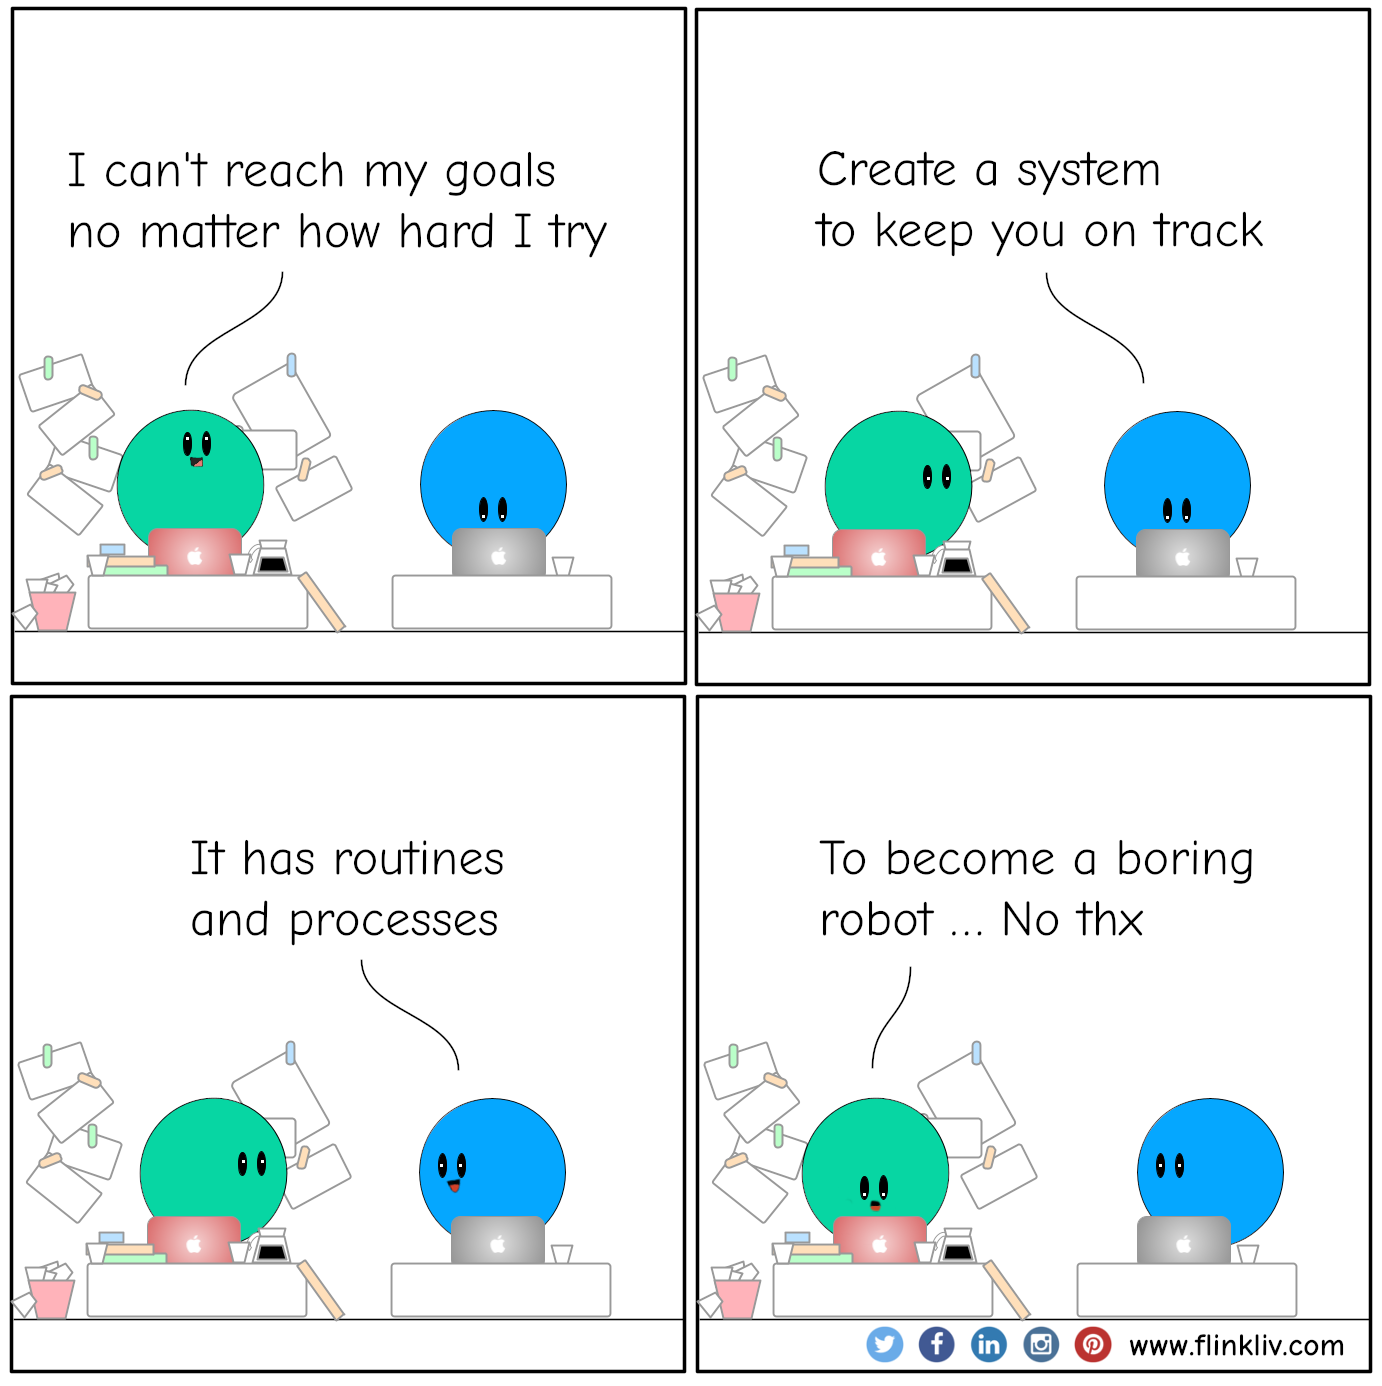  Conversation between A and B about how to get goals done by creating a process.
				A: I can't reach my goals no matter how hard I try
				B: Create a system to keep you on track
				It has routines and processes.
				A: To become a boring robot. Nah. Beep boop beep.
              